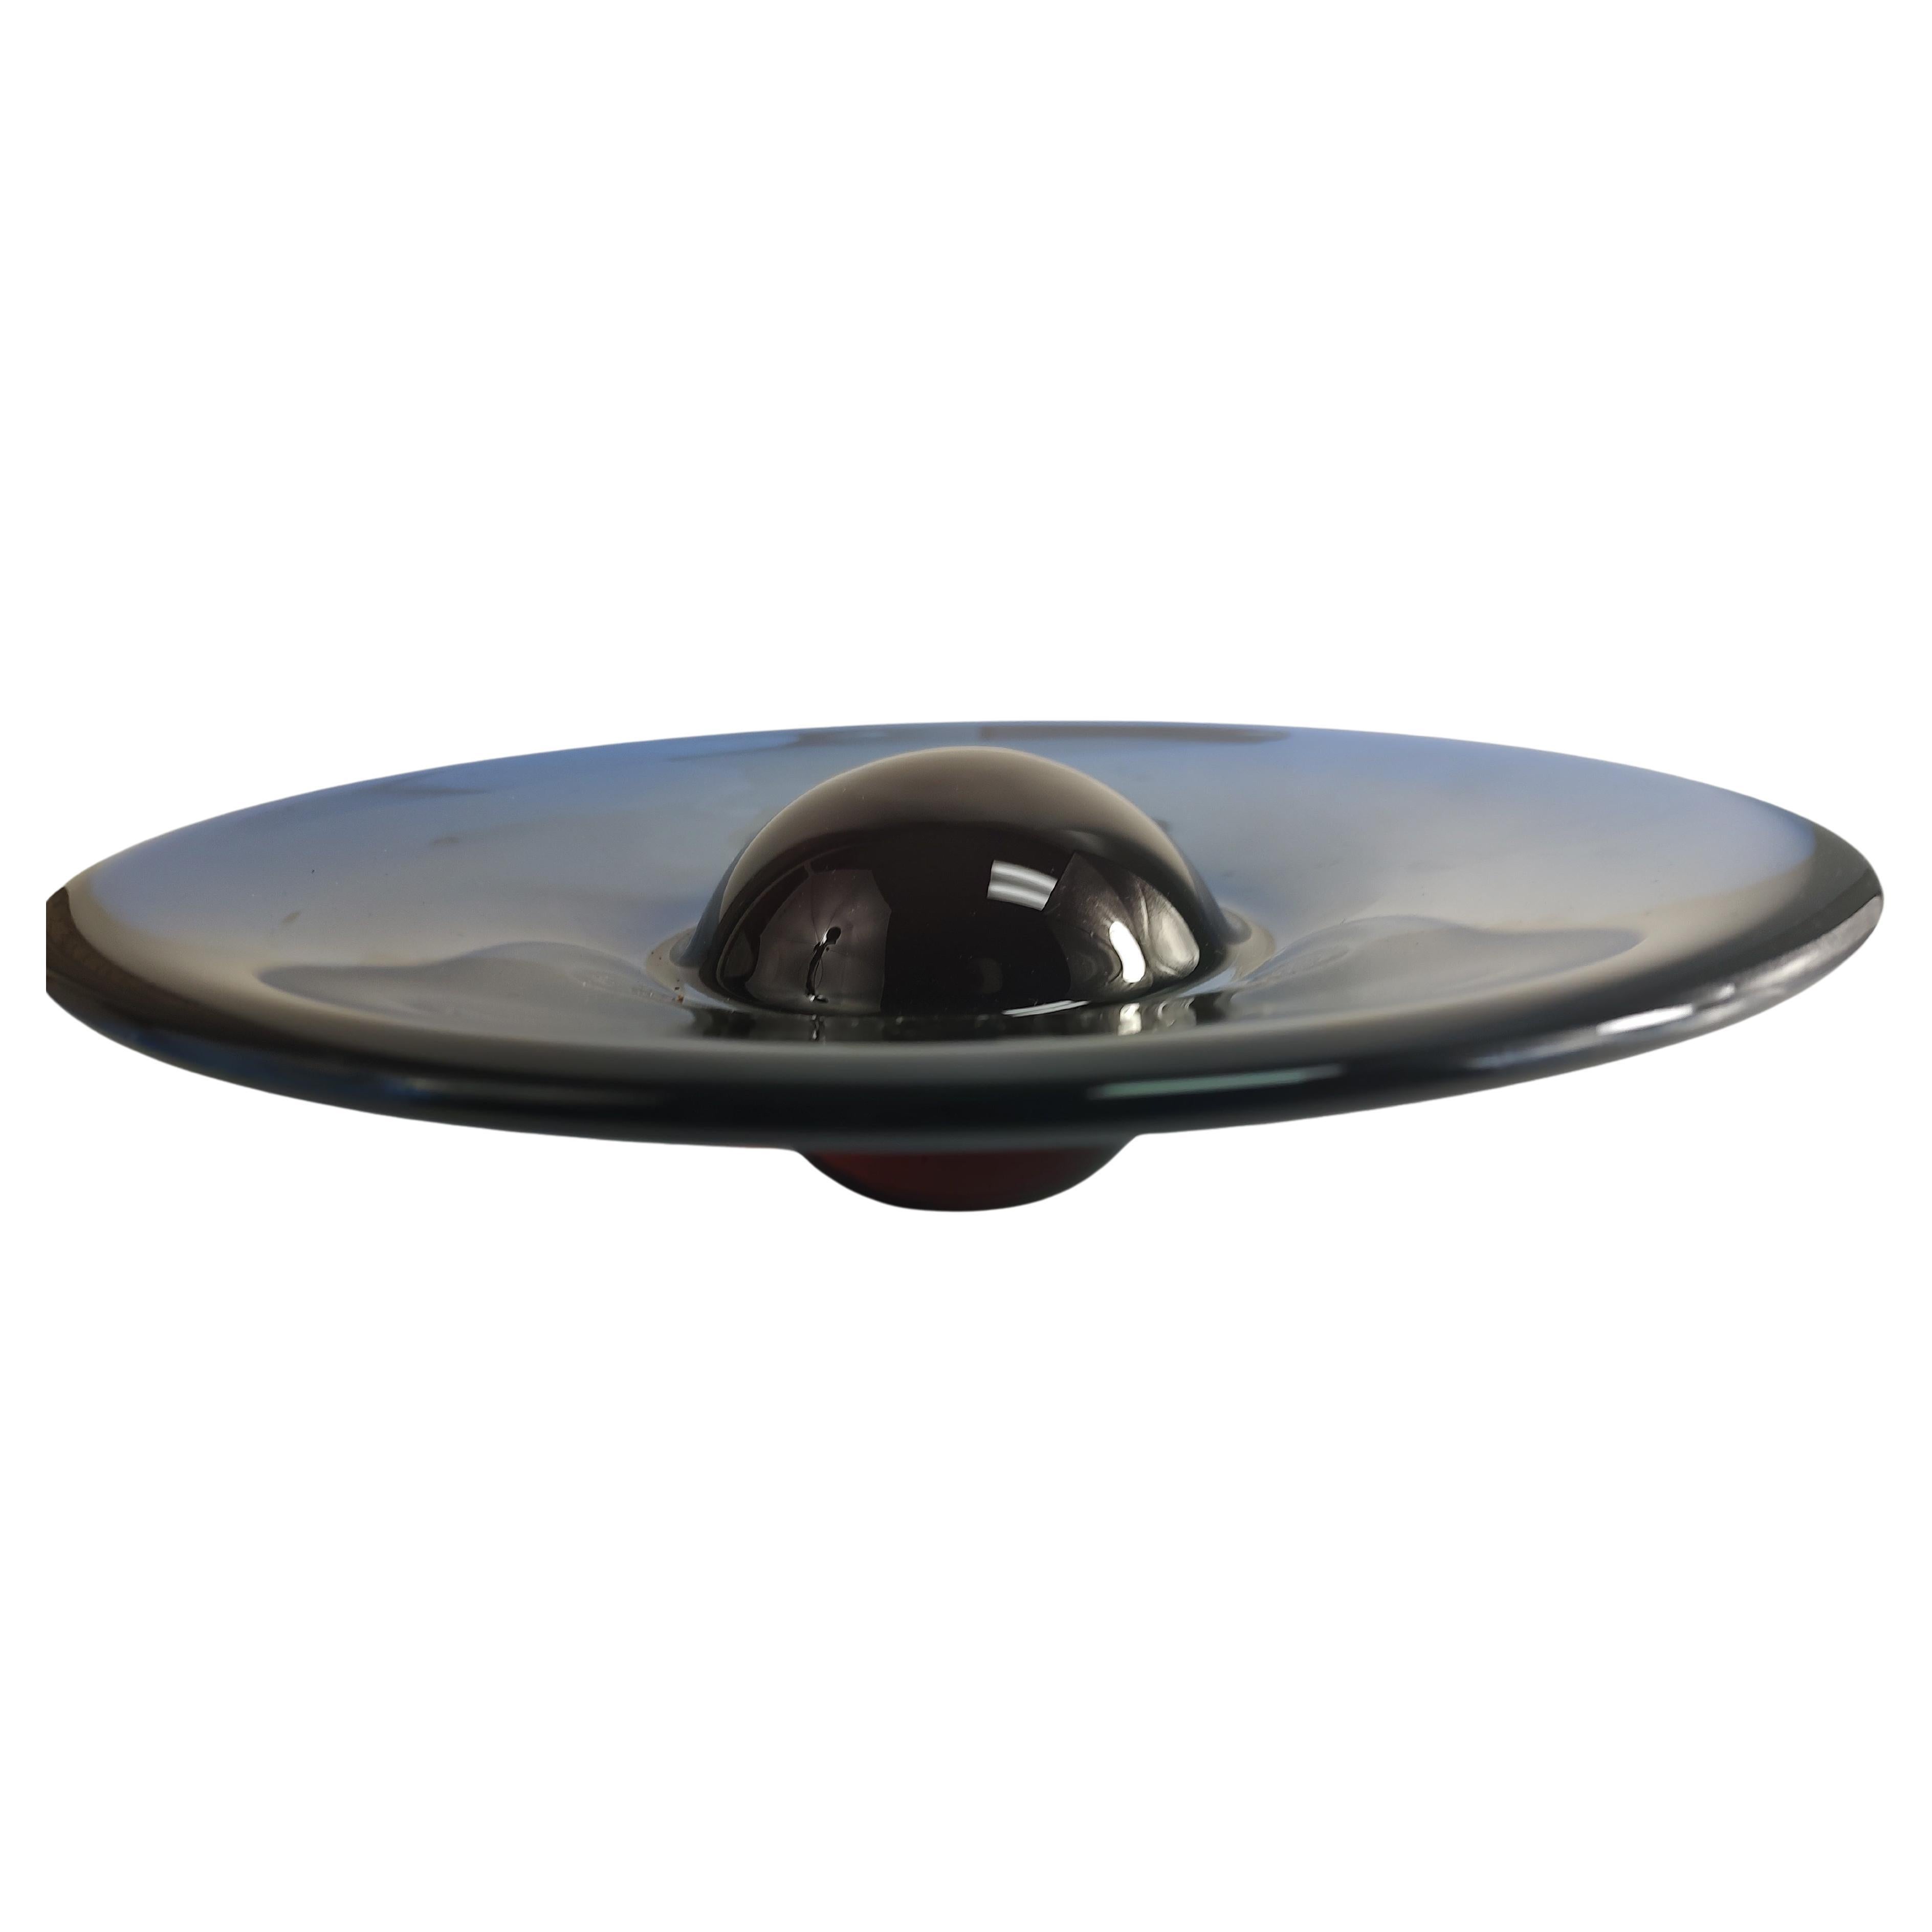 Fabulous Art Glass Dish by Jaroslav Wasserbauer, UFO dish with a very dark red ball in the center.  Fantastic color, signed. In excellent condition with no flaws or marks of any kind